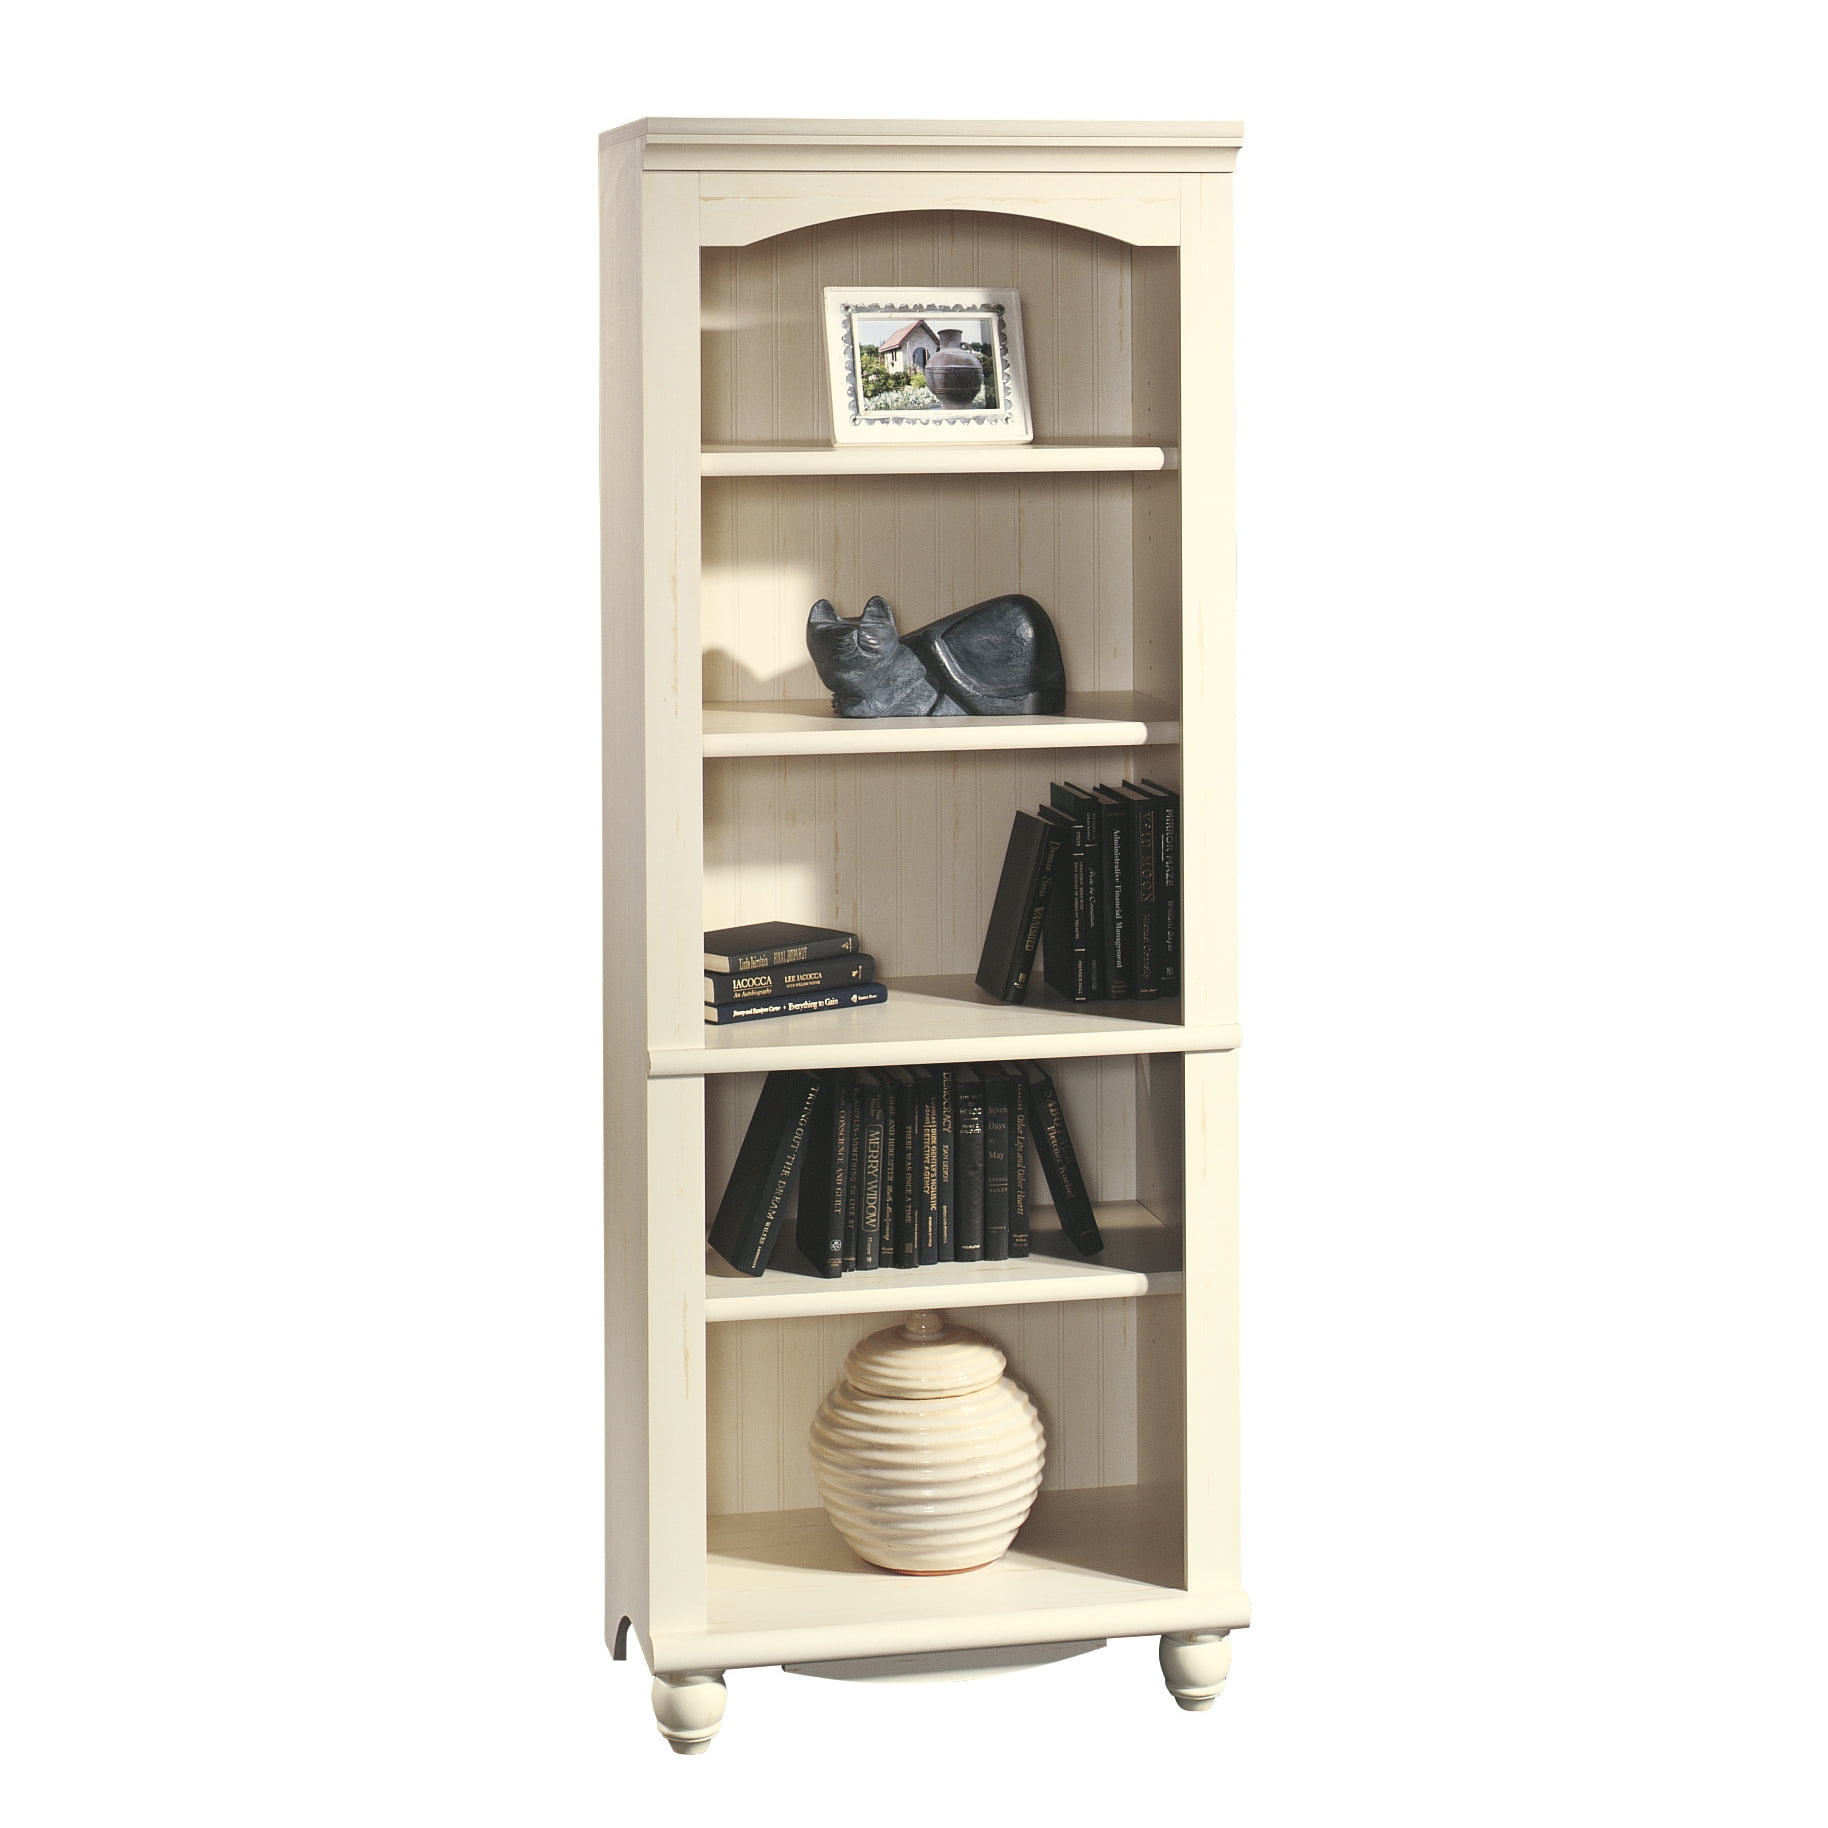 Sauder 401633 Harbor View Library Antiqued Paint Finish